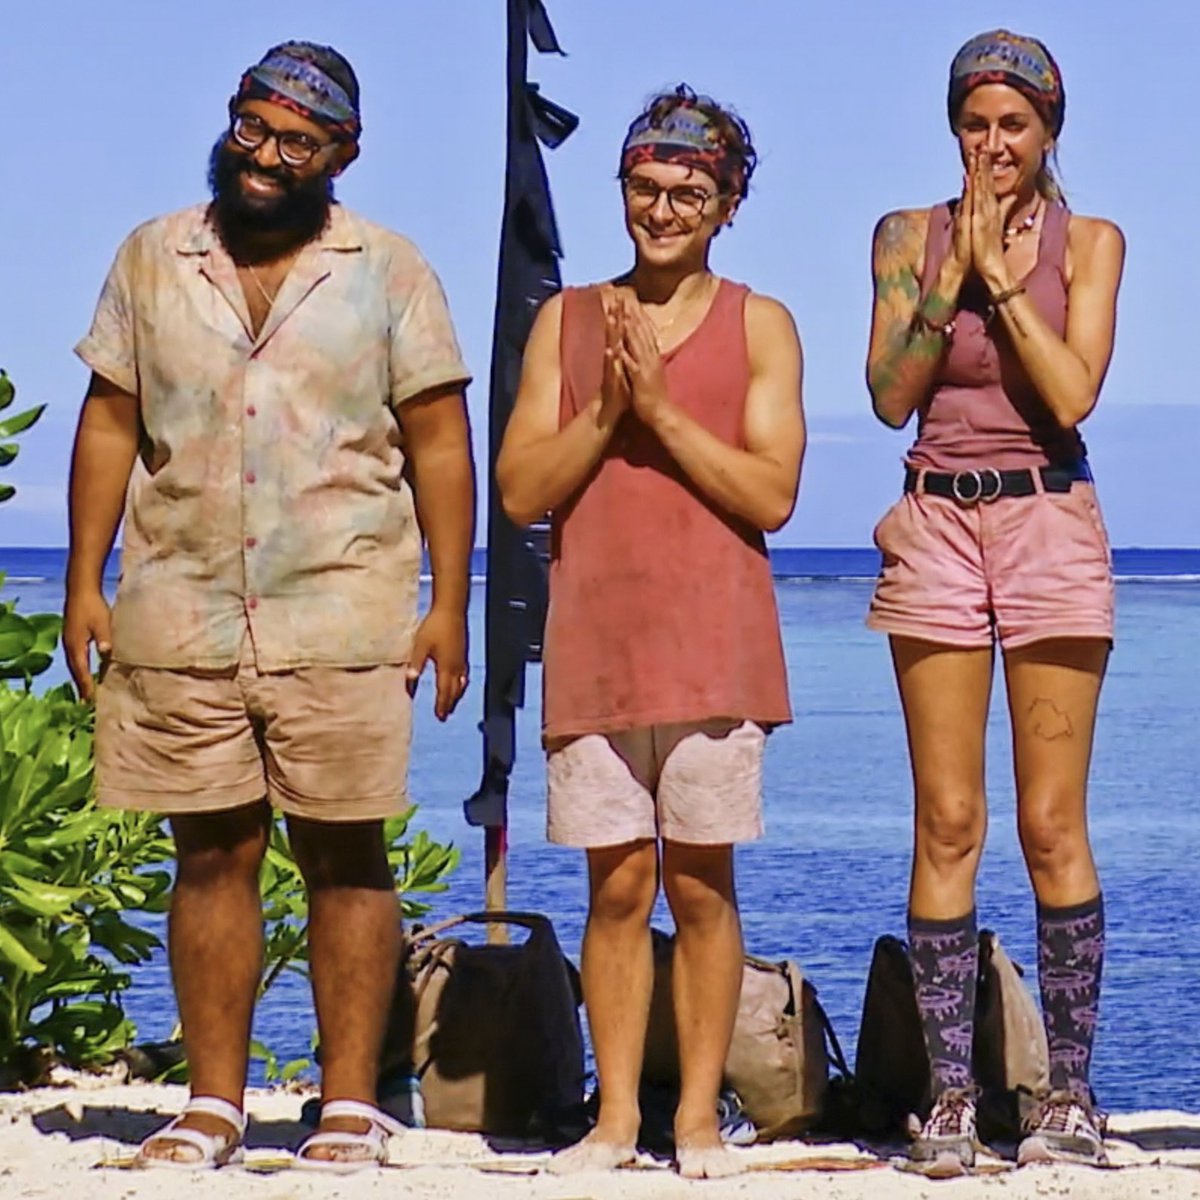 From outnumbered at the merge 5💚to 4🧡 to 3💜 and underestimated by every other tribe now to the #Survivor Finale having kept fully intact, I am still in awe to be part of the 3 stooges or Tika 3 💜💜💜

“It is not in numbers, but in unity, that our great strength lies”  - Paine